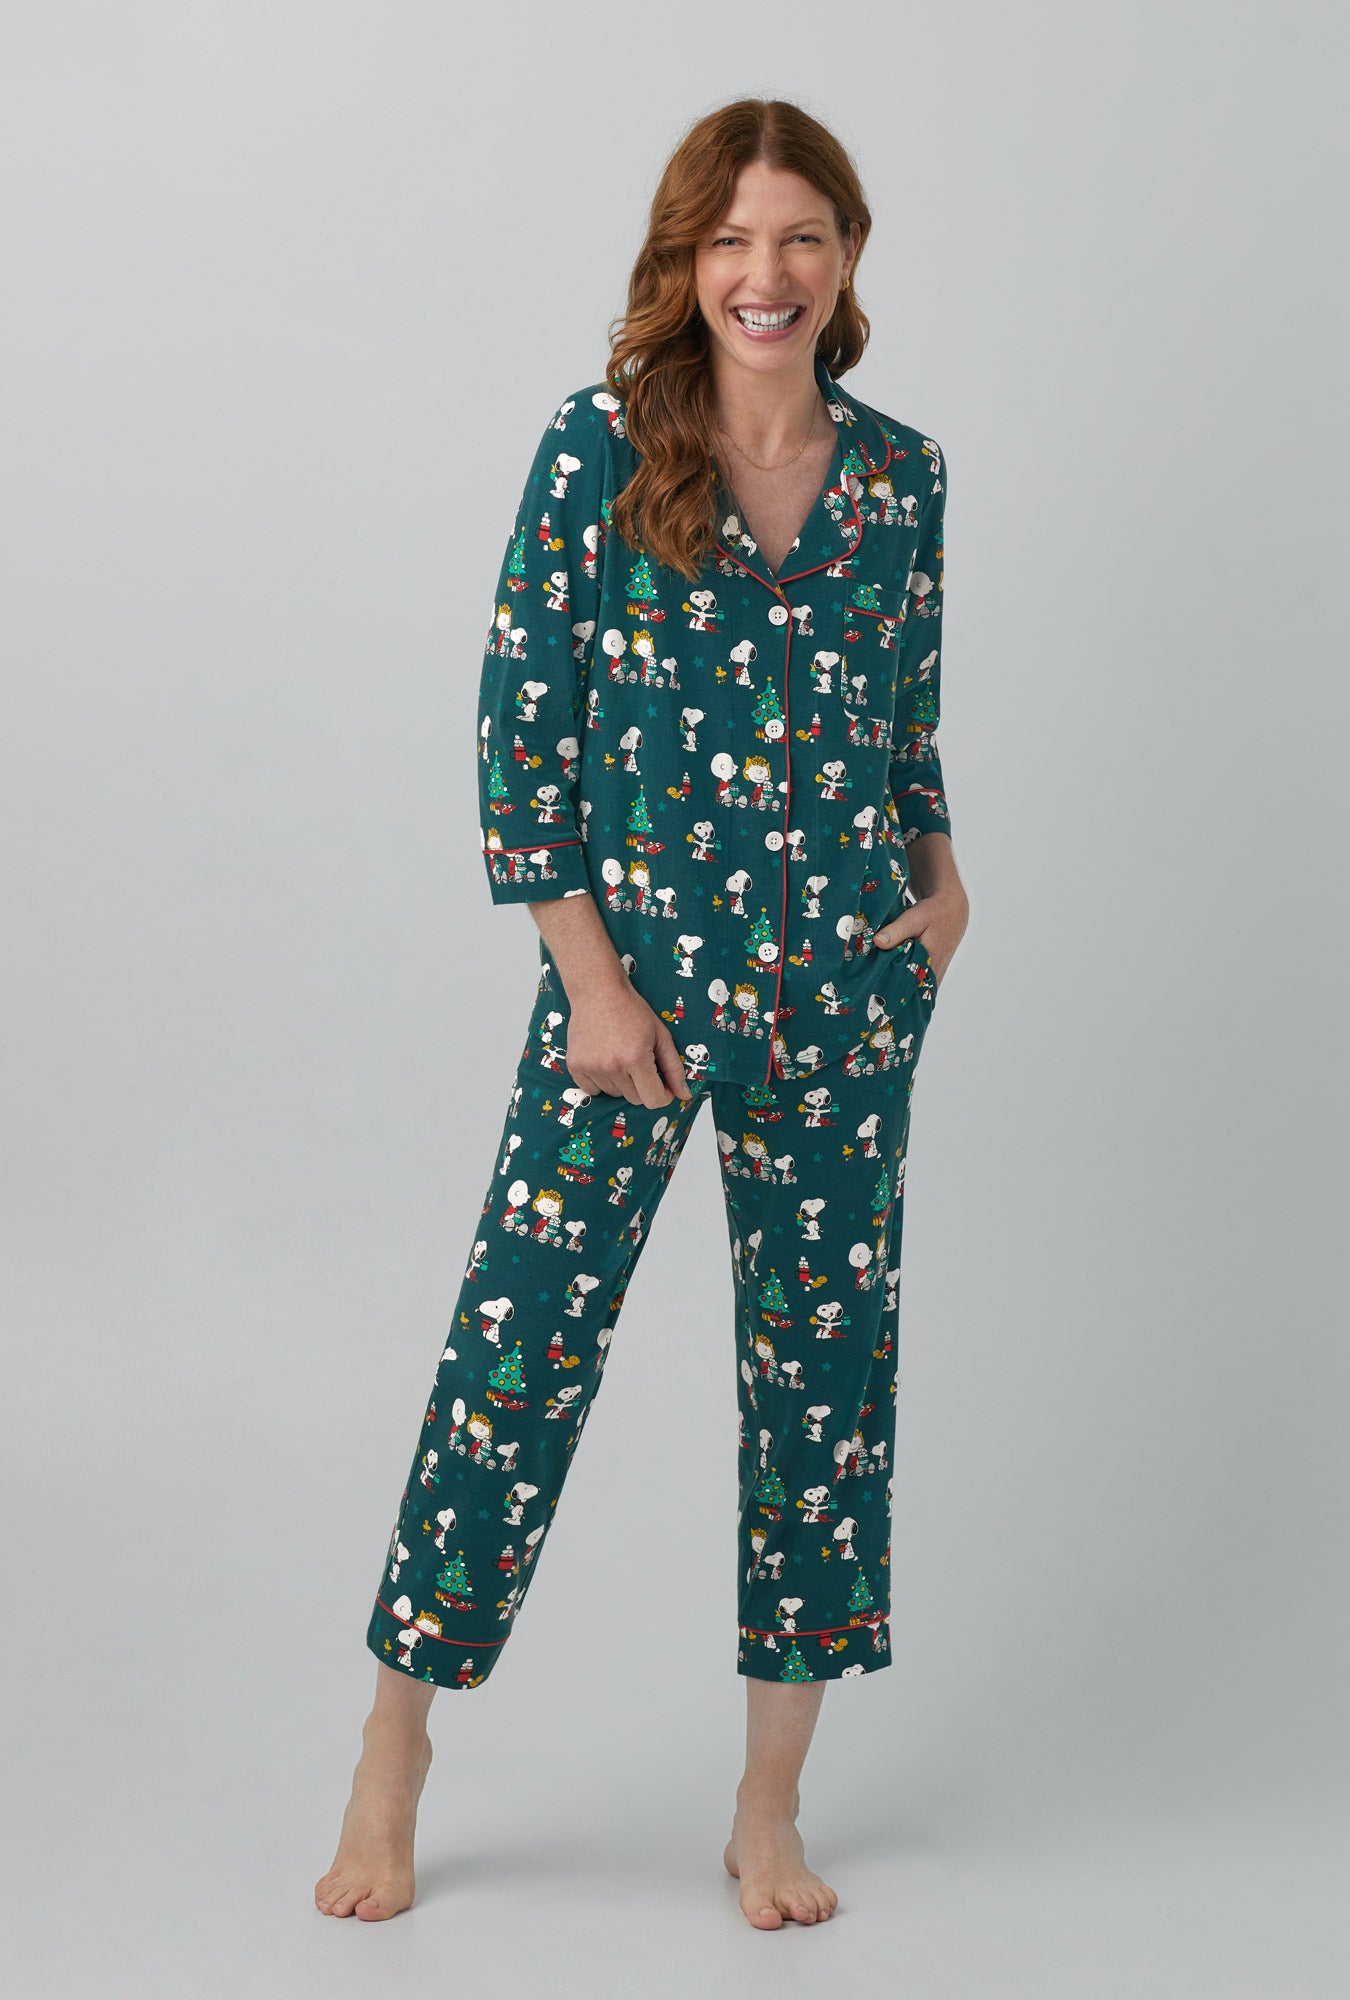 A lady wearing green 3/4 Sleeve Classic Stretch Jersey Cropped  PJ Set with Snoopy's Cocoa print